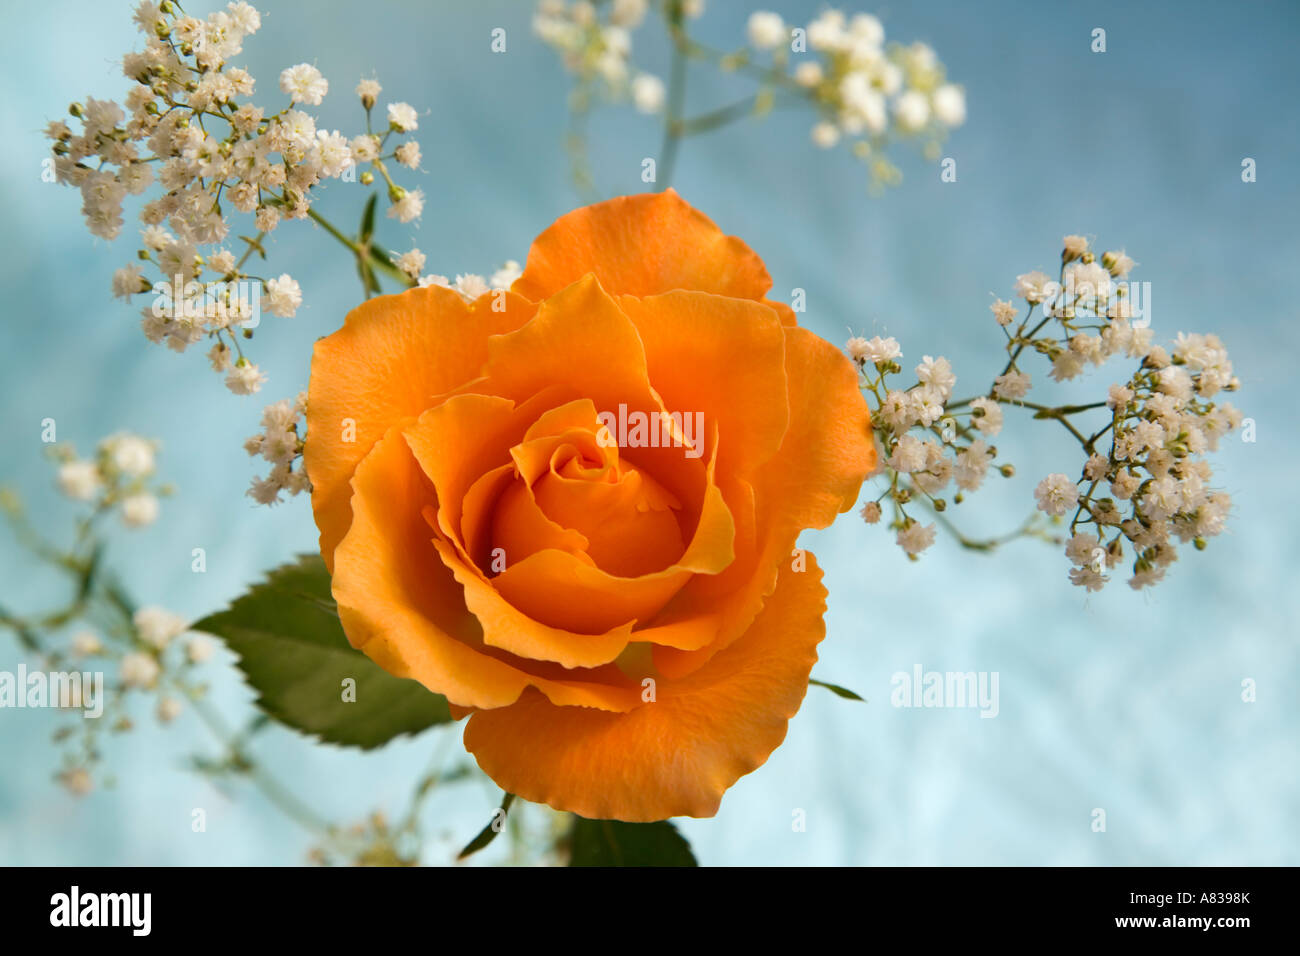 Single peach rose Rosa flower front view with Gypsophila flowers on mottled light pale blue backdrop Stock Photo